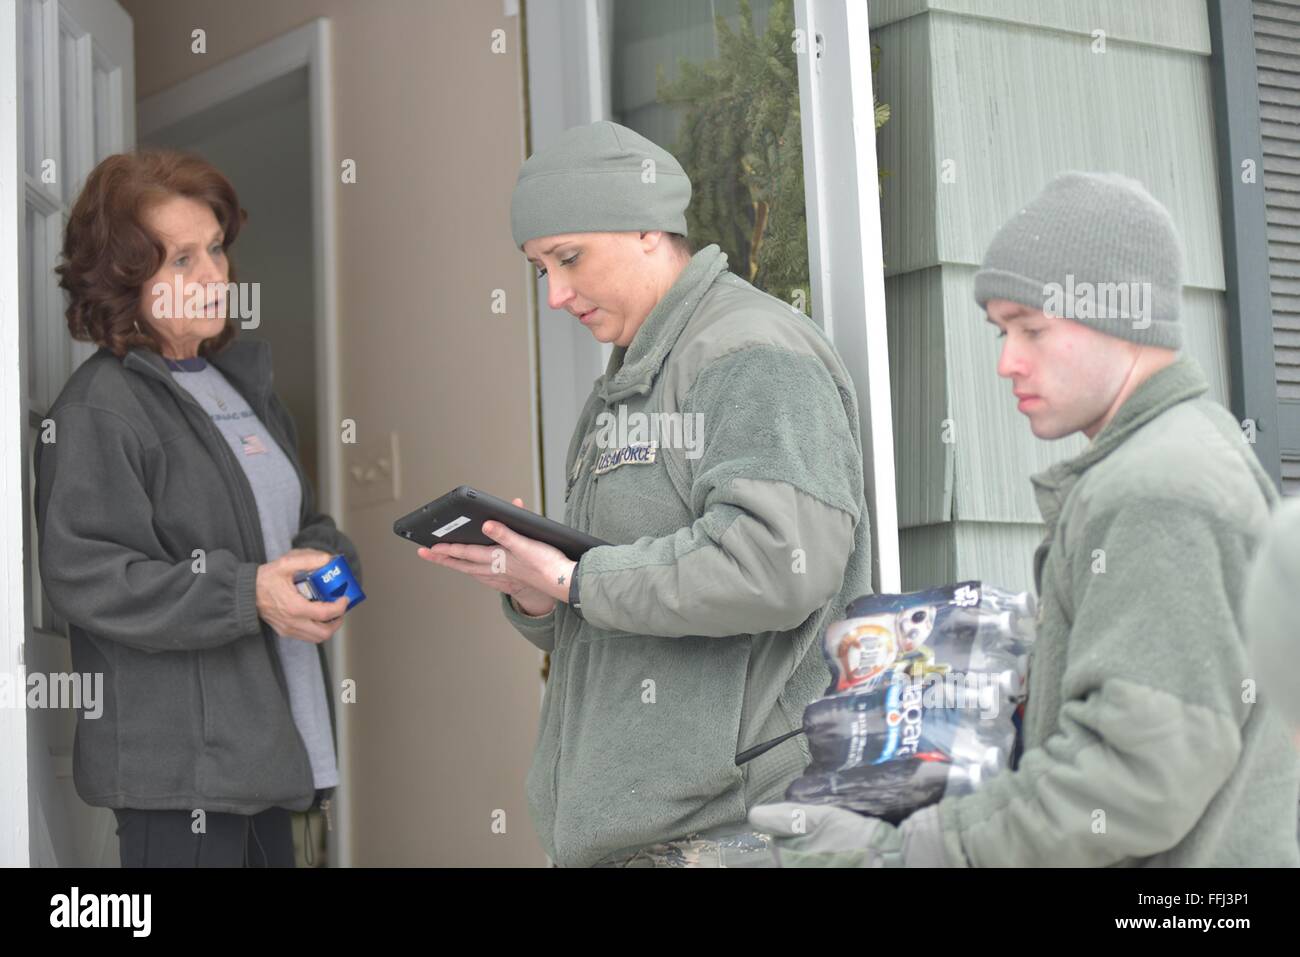 U.S Air Force airmen with the Michigan National Air Guard distribute bottled water to residents effected by lead contamination in the city drinking water January 21, 2016 in Flint, Michigan. As many as 12,000 children have been exposed to dangerous drinking water after the state government switched water supplies without complying with federal regulations on safety. Stock Photo